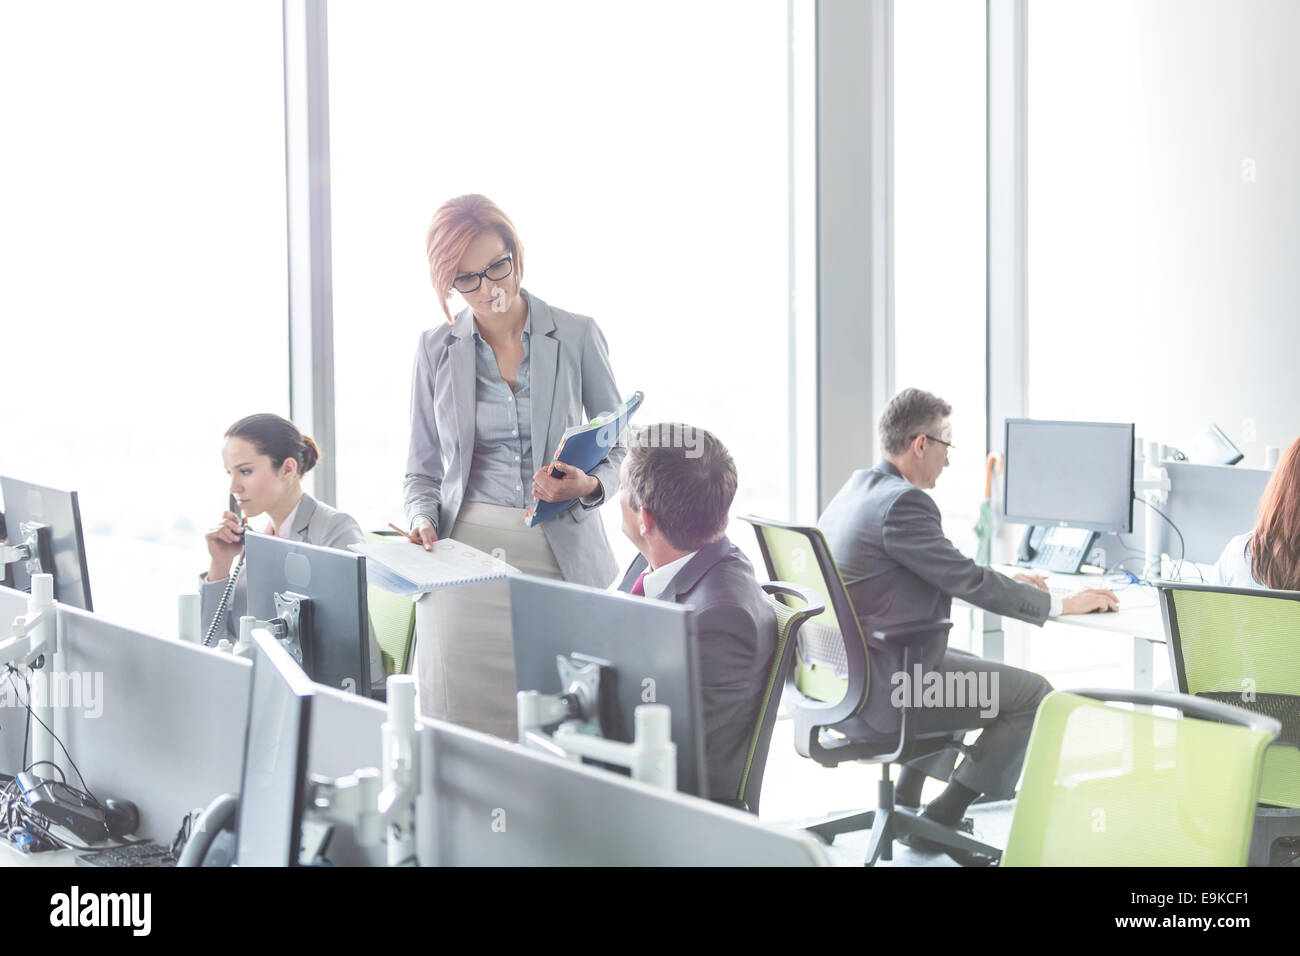 Business people working in open plan office Stock Photo